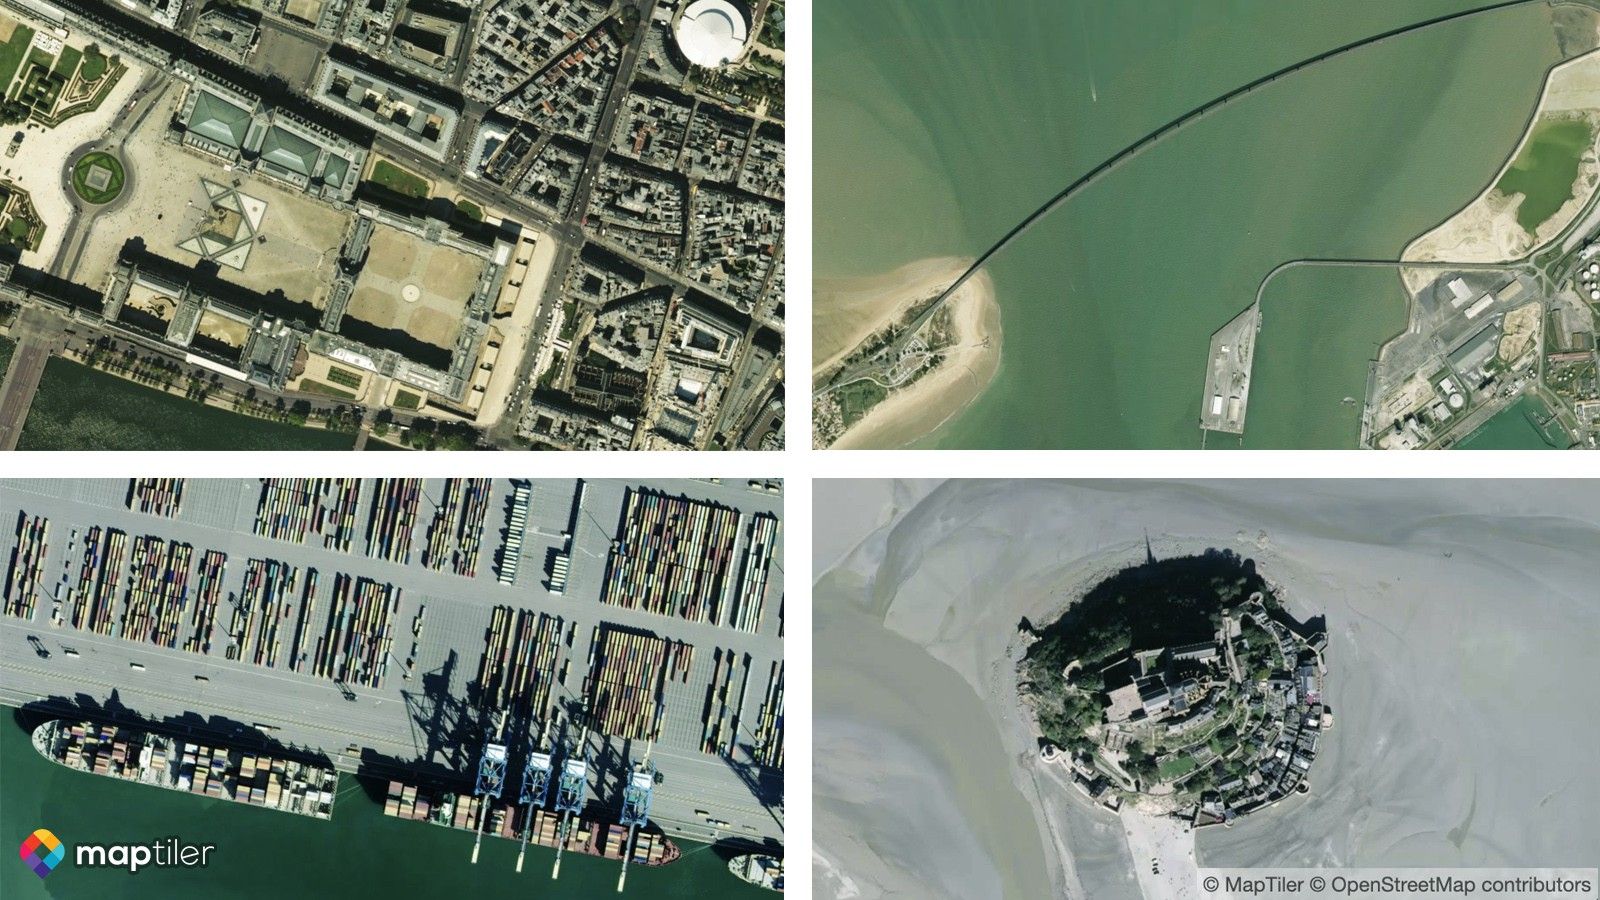 2020-01-20-french-open-data-imagery-available-in-maptiler-maps-api-2.jpg